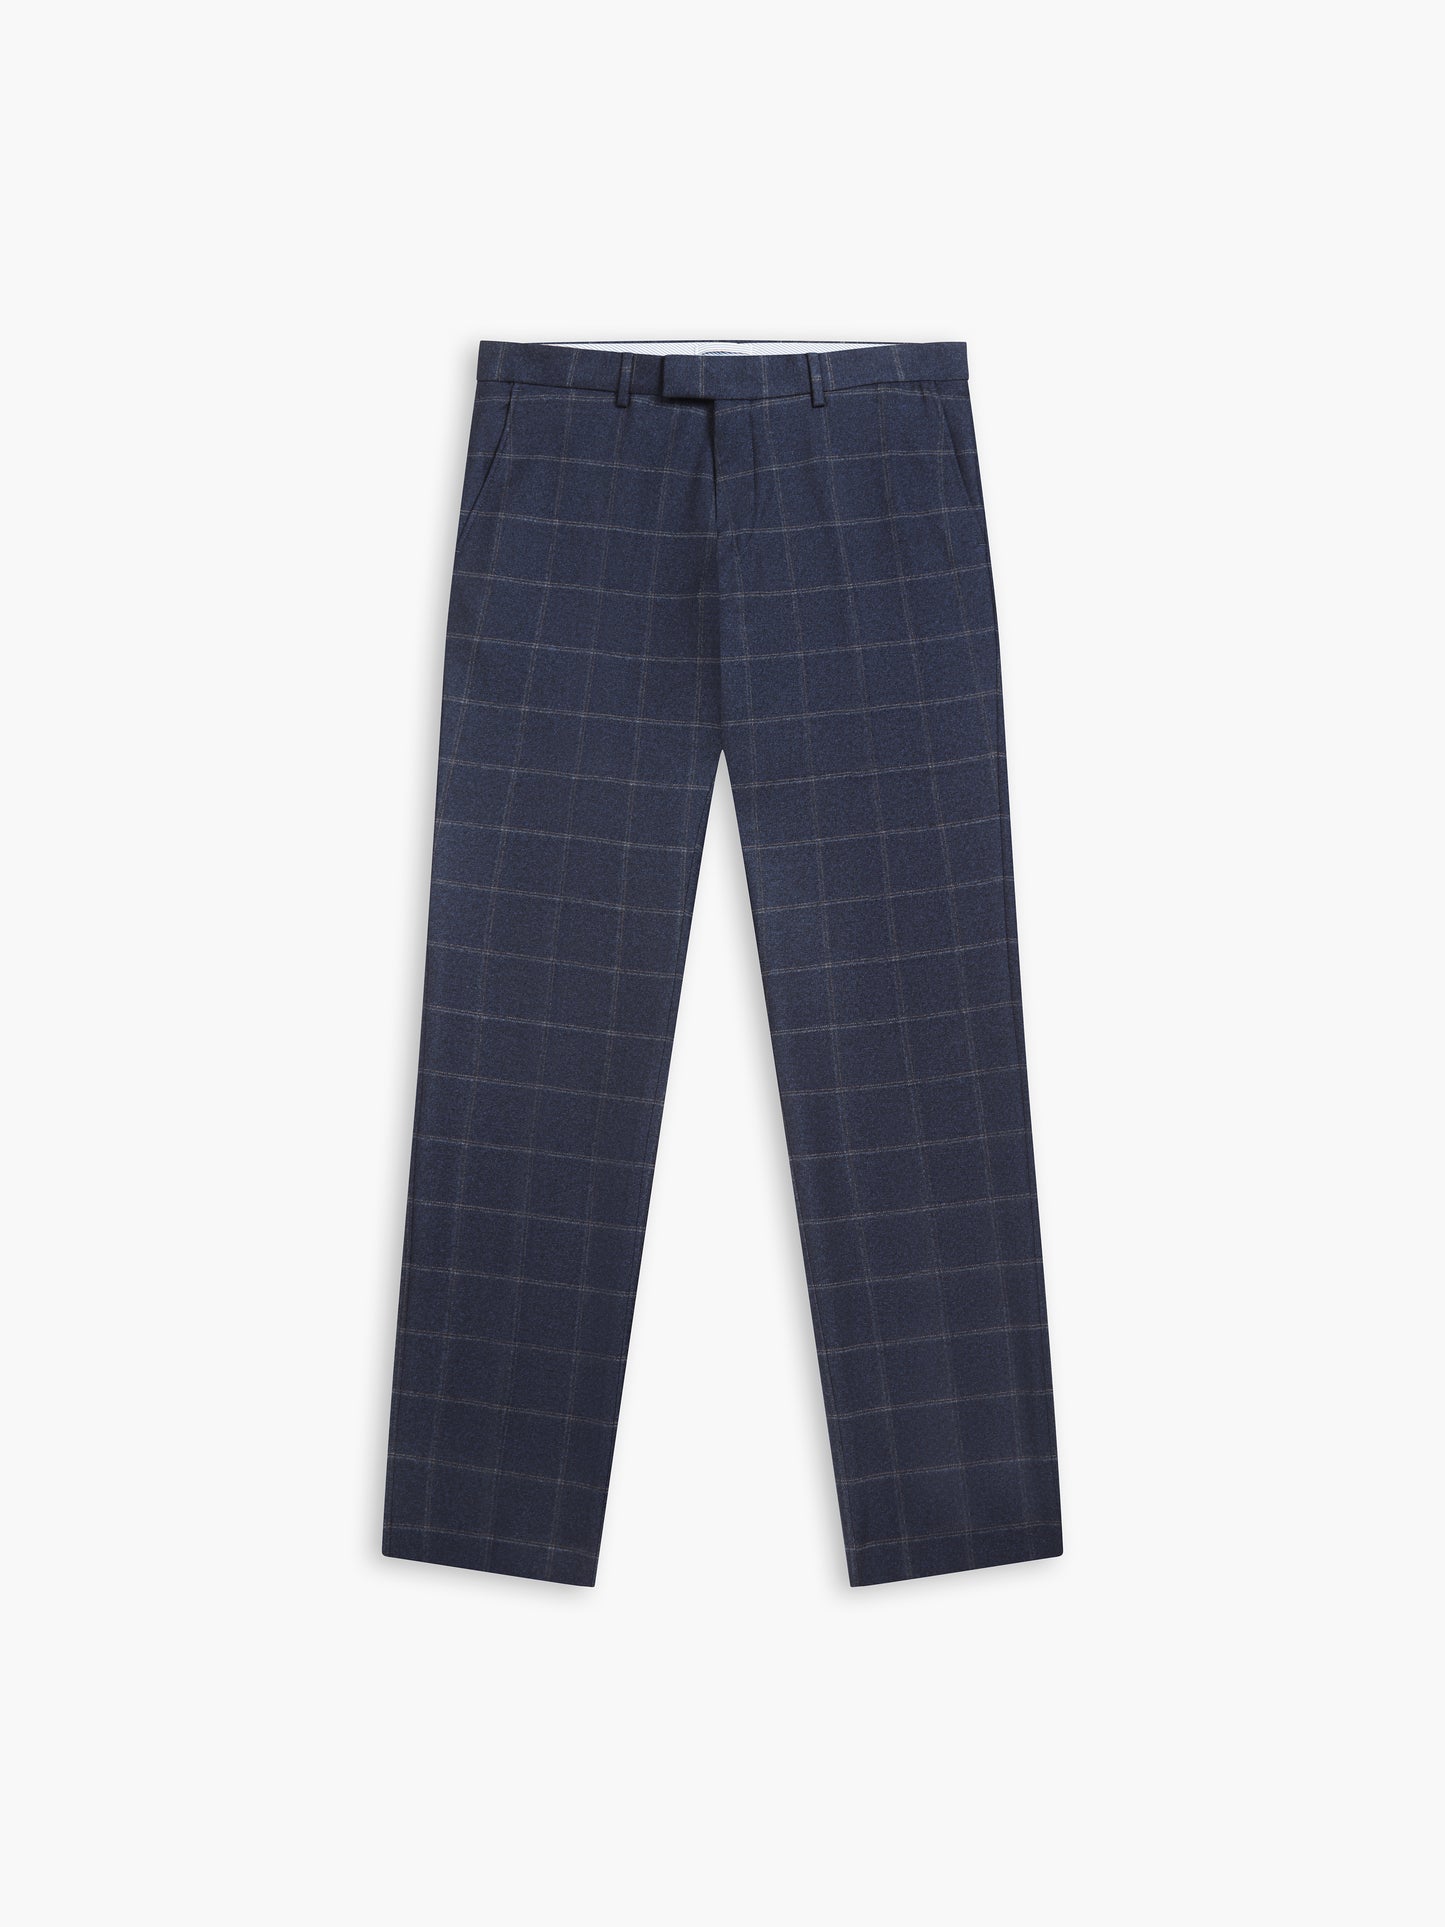 Jubilee Wool Silk Cashmere Slim Fit Navy and Beige Check Trousers